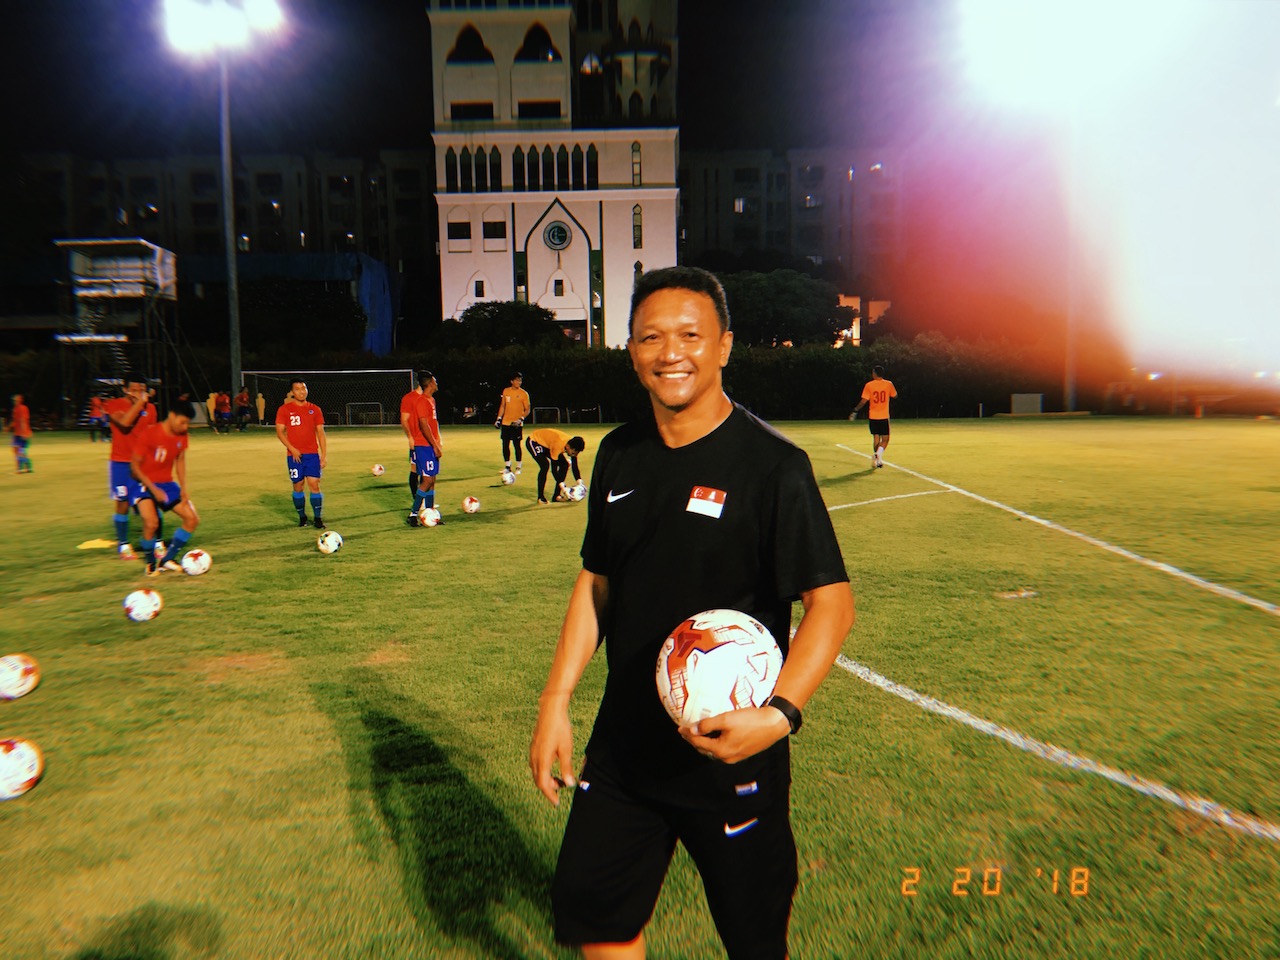 Fandi Ahmad and the Staggering Burden of a Nation’s Dreams